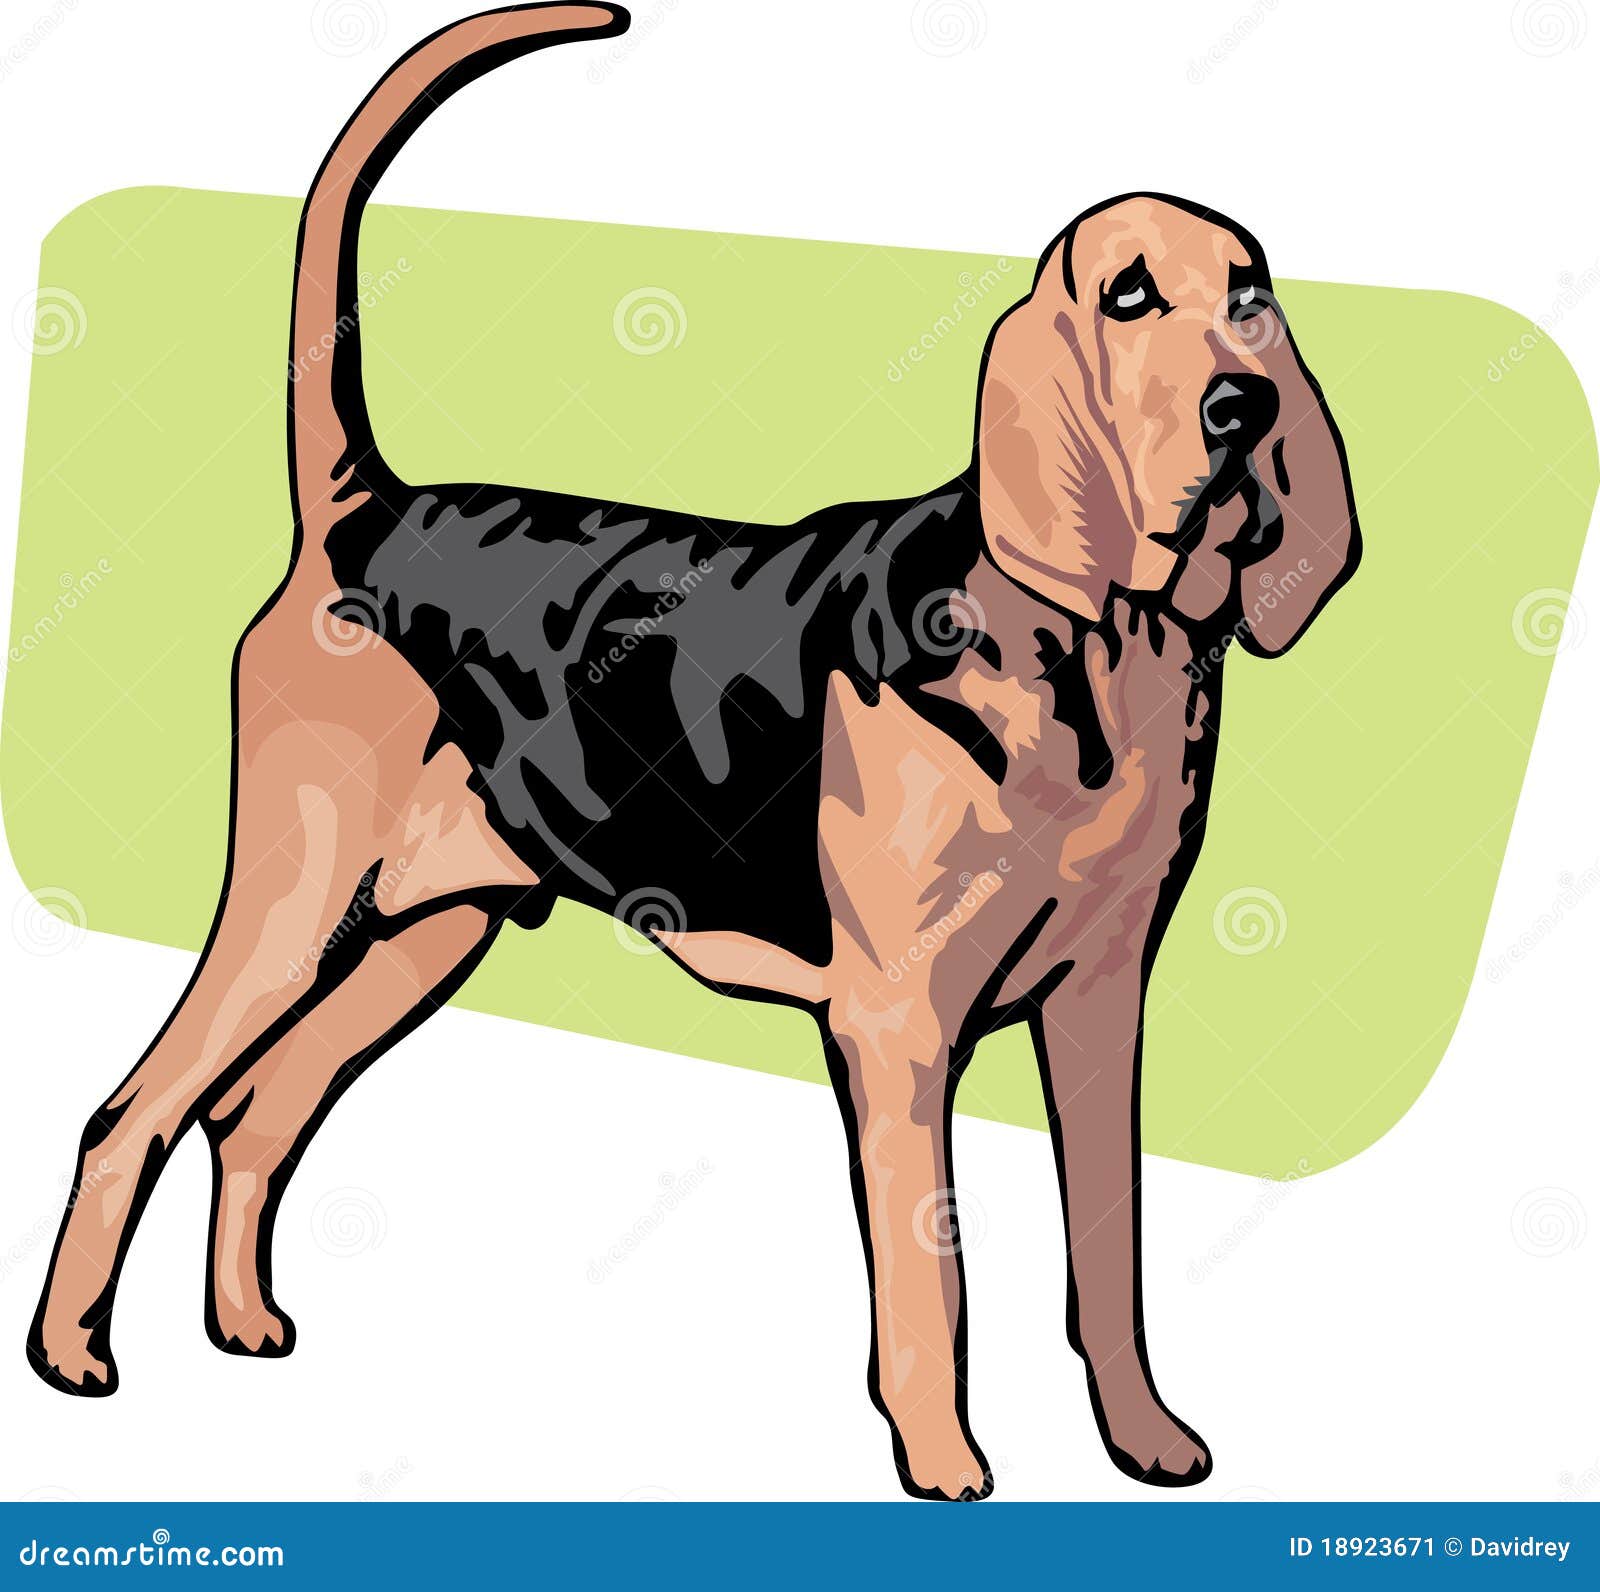 https://thumbs.dreamstime.com/z/standing-bloodhound-breed-dog-18923671.jpg